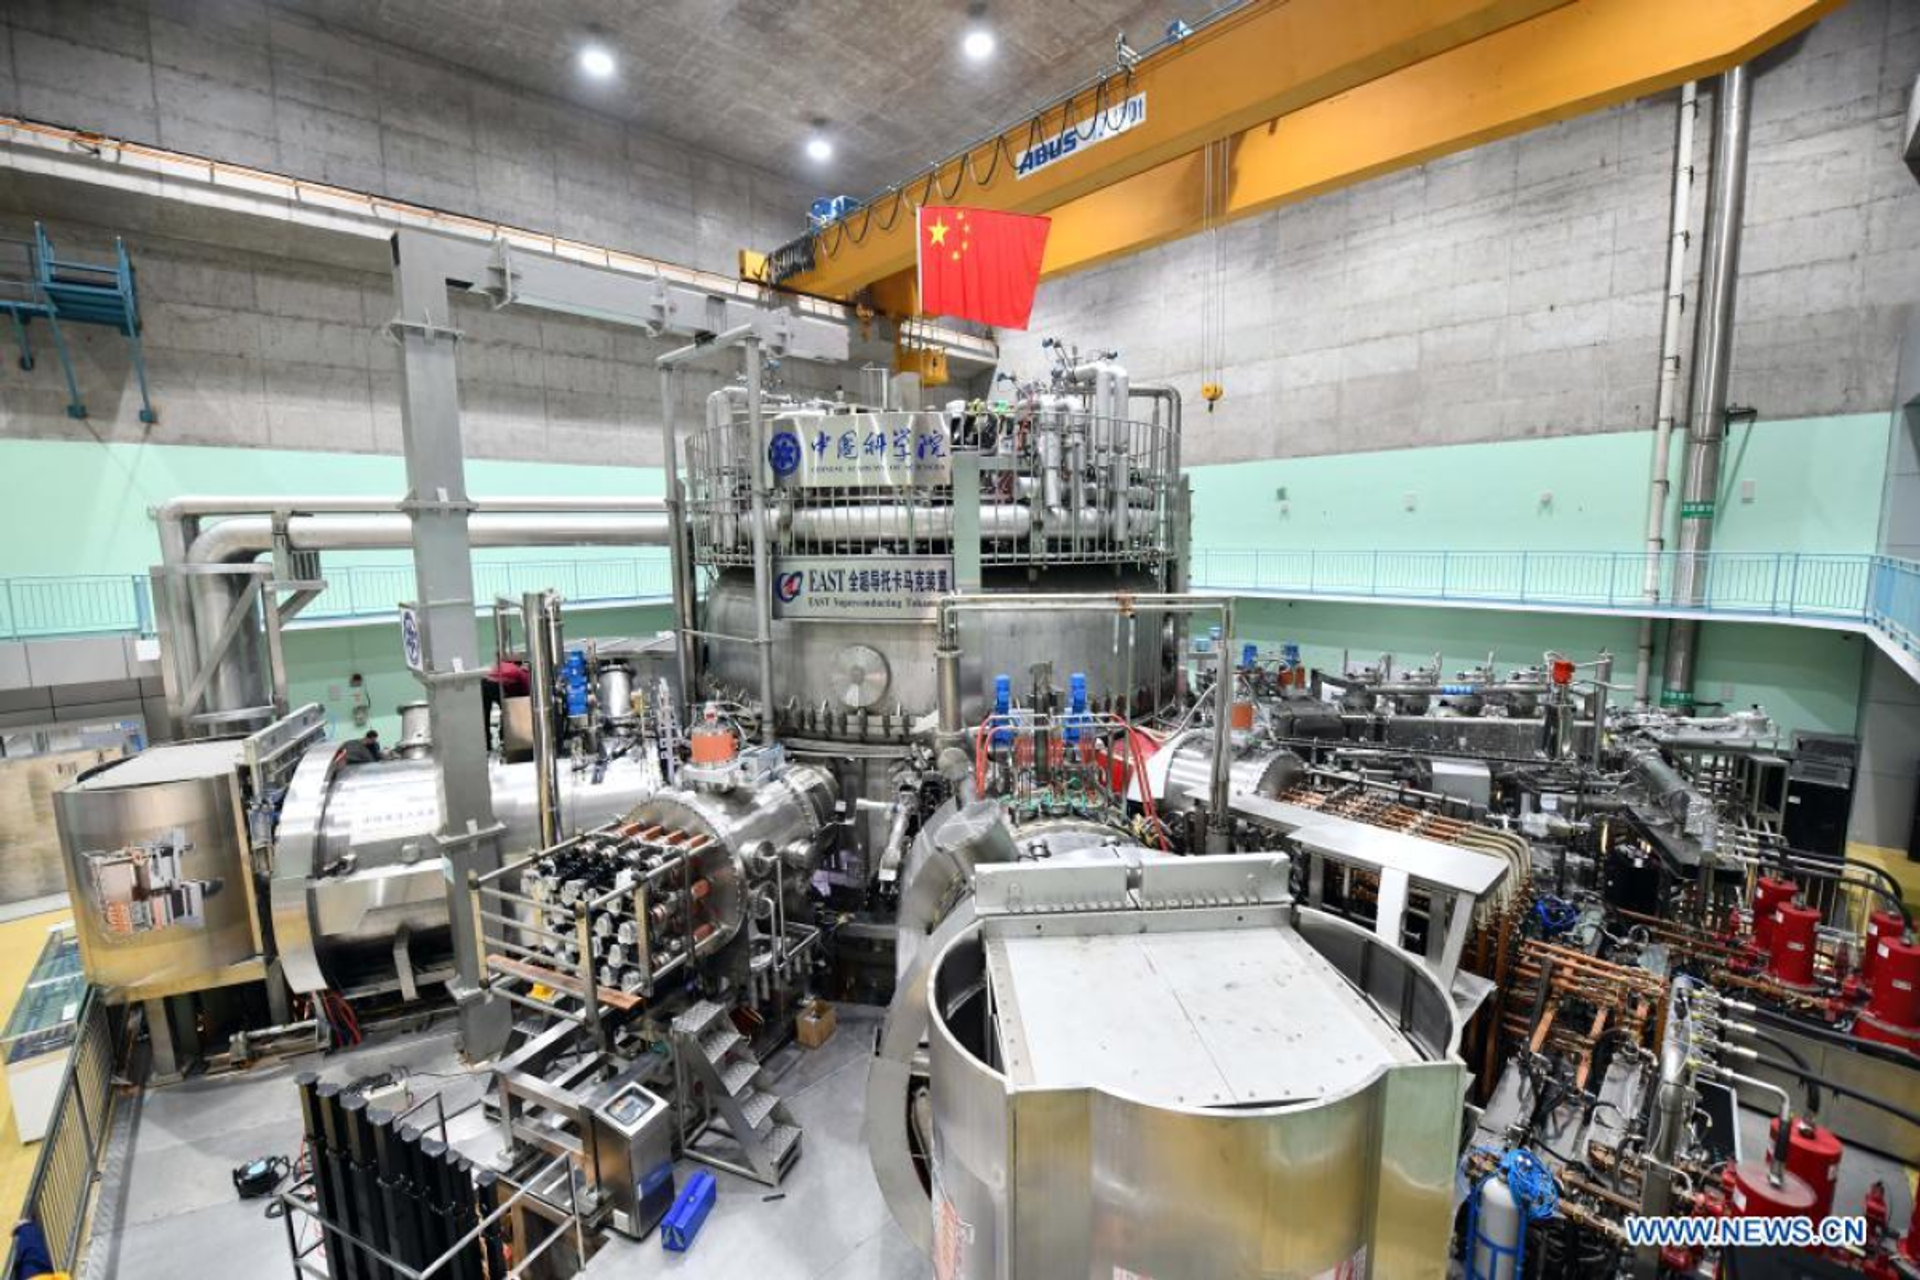 Chinese ‘Artificial Sun’ Experimental Fusion Reactor Sets World Record for Superheated Plasma Time - Sputnik International, 1920, 28.05.2021